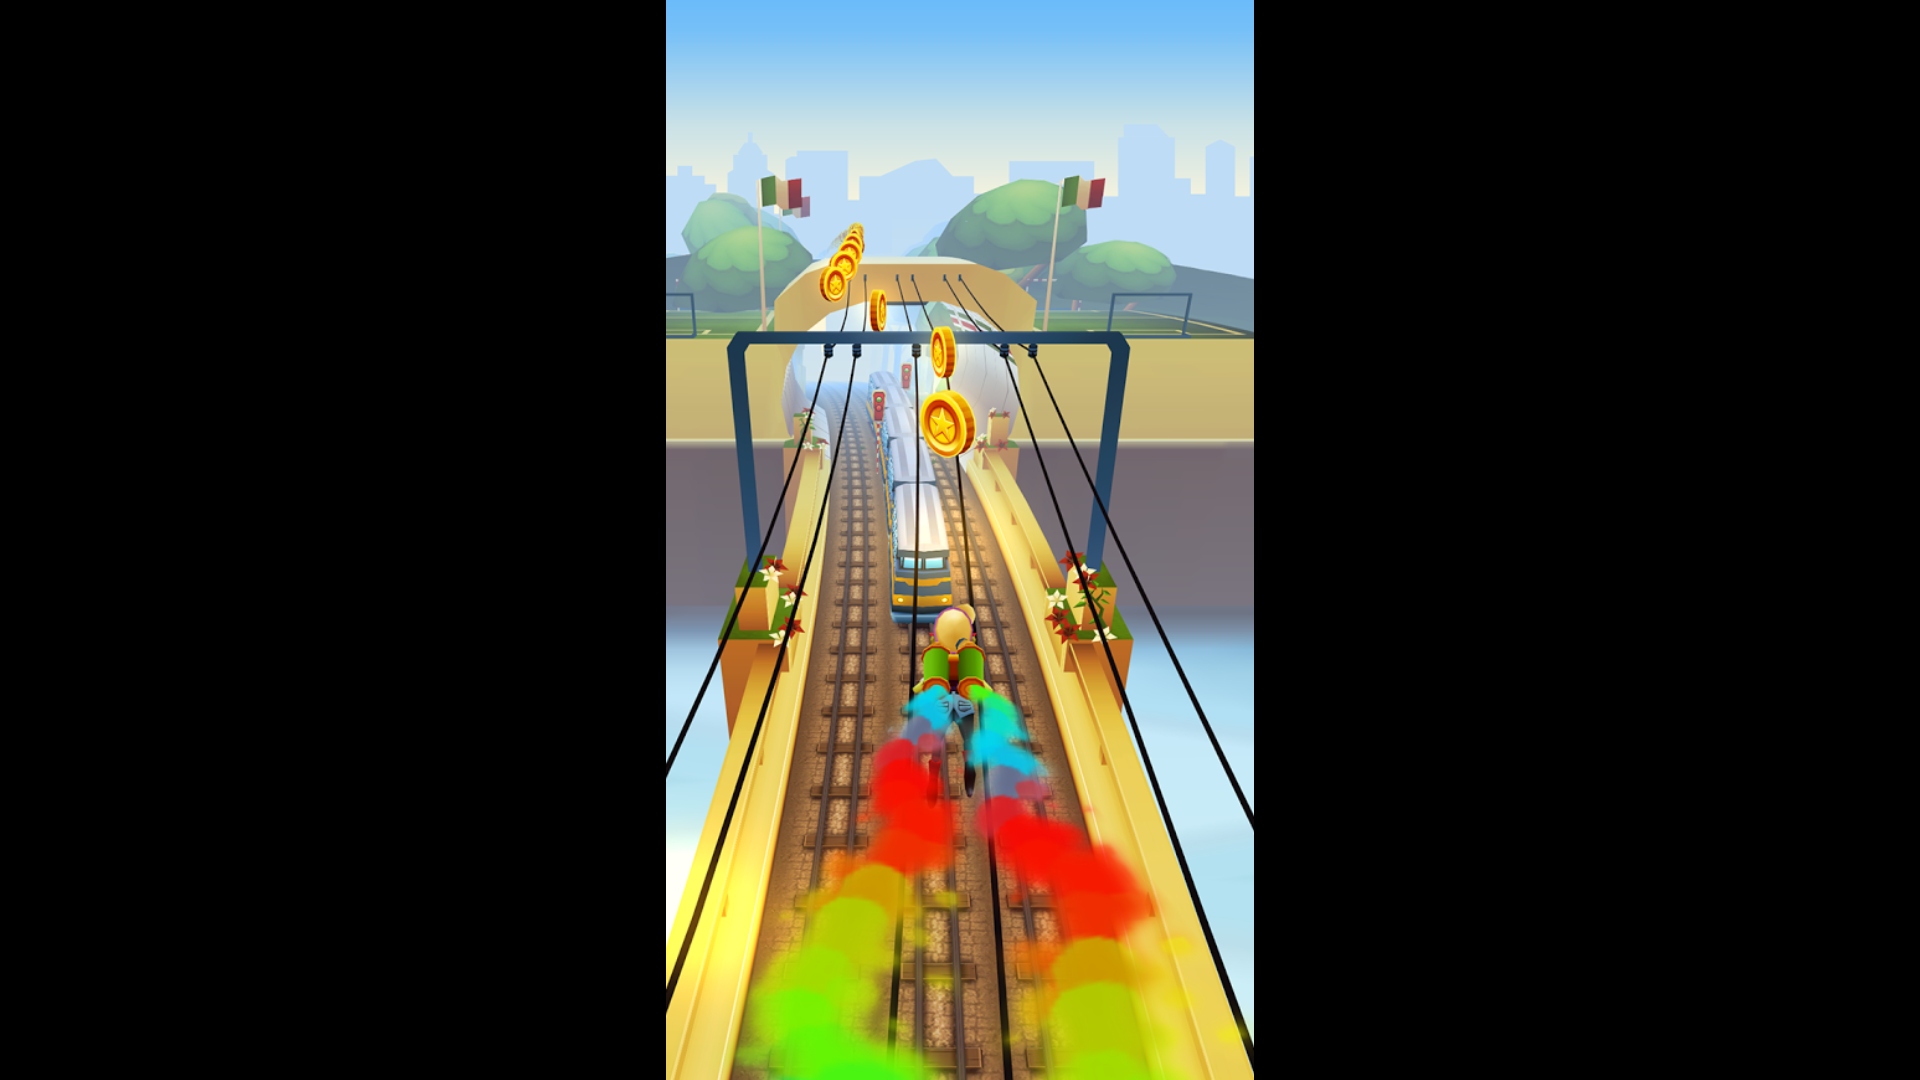 Addictive games, Subway Surfers - image shows a character running along on wires above train tracks.